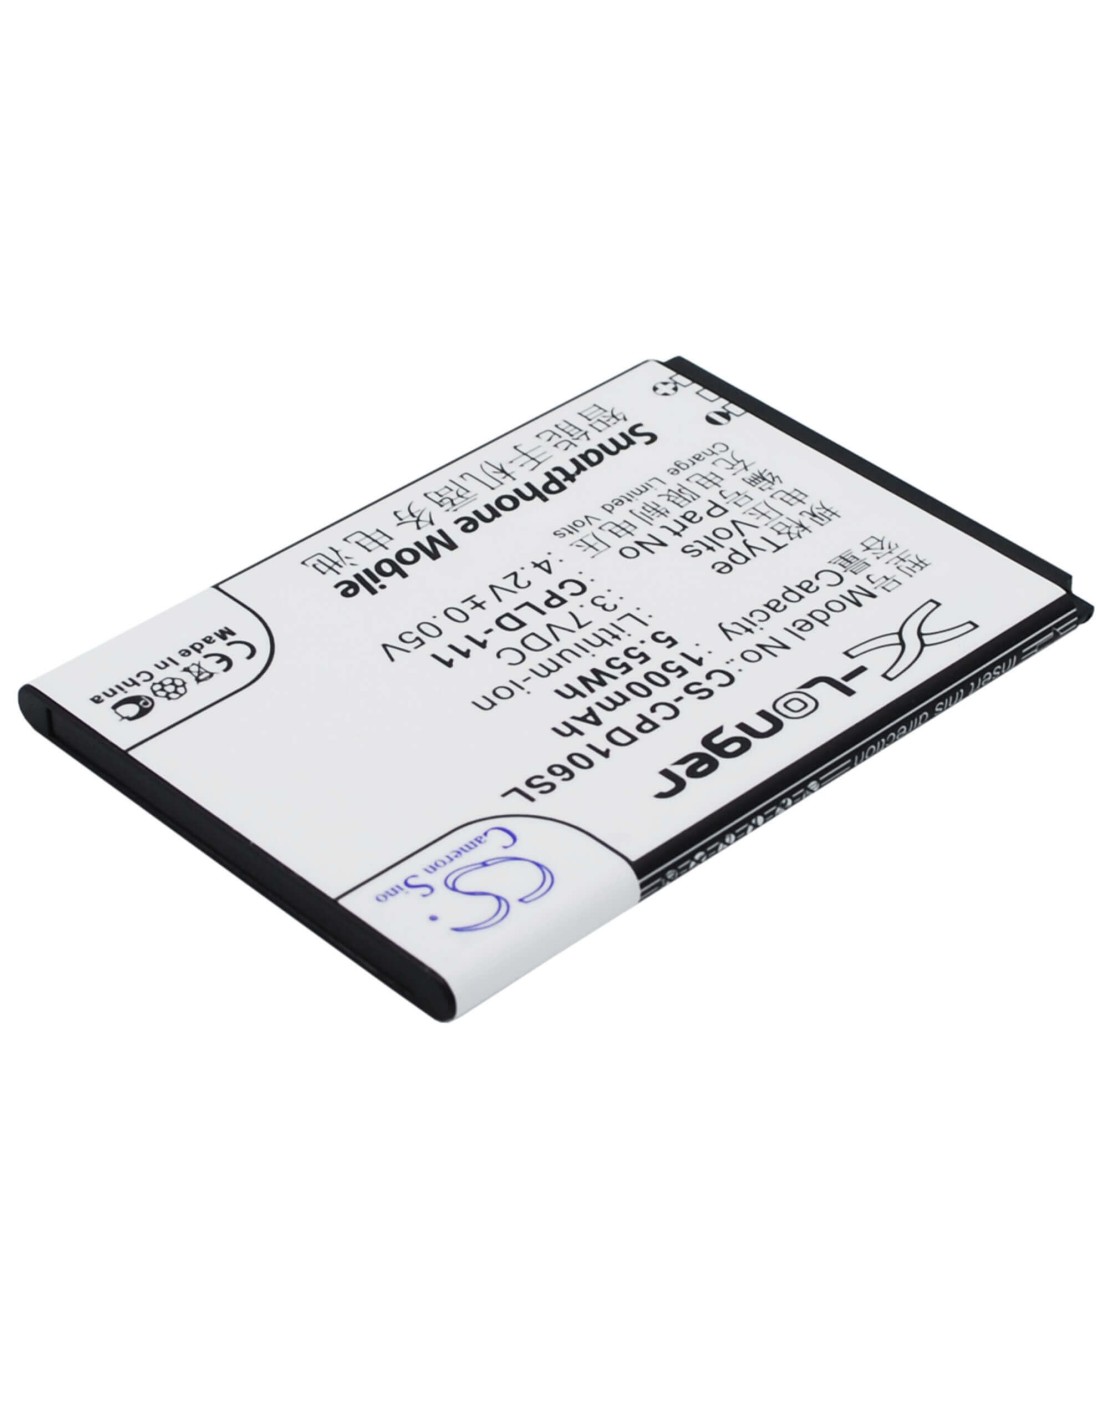 Battery for Coolpad 5213, 5216d 3.7V, 1500mAh - 5.55Wh